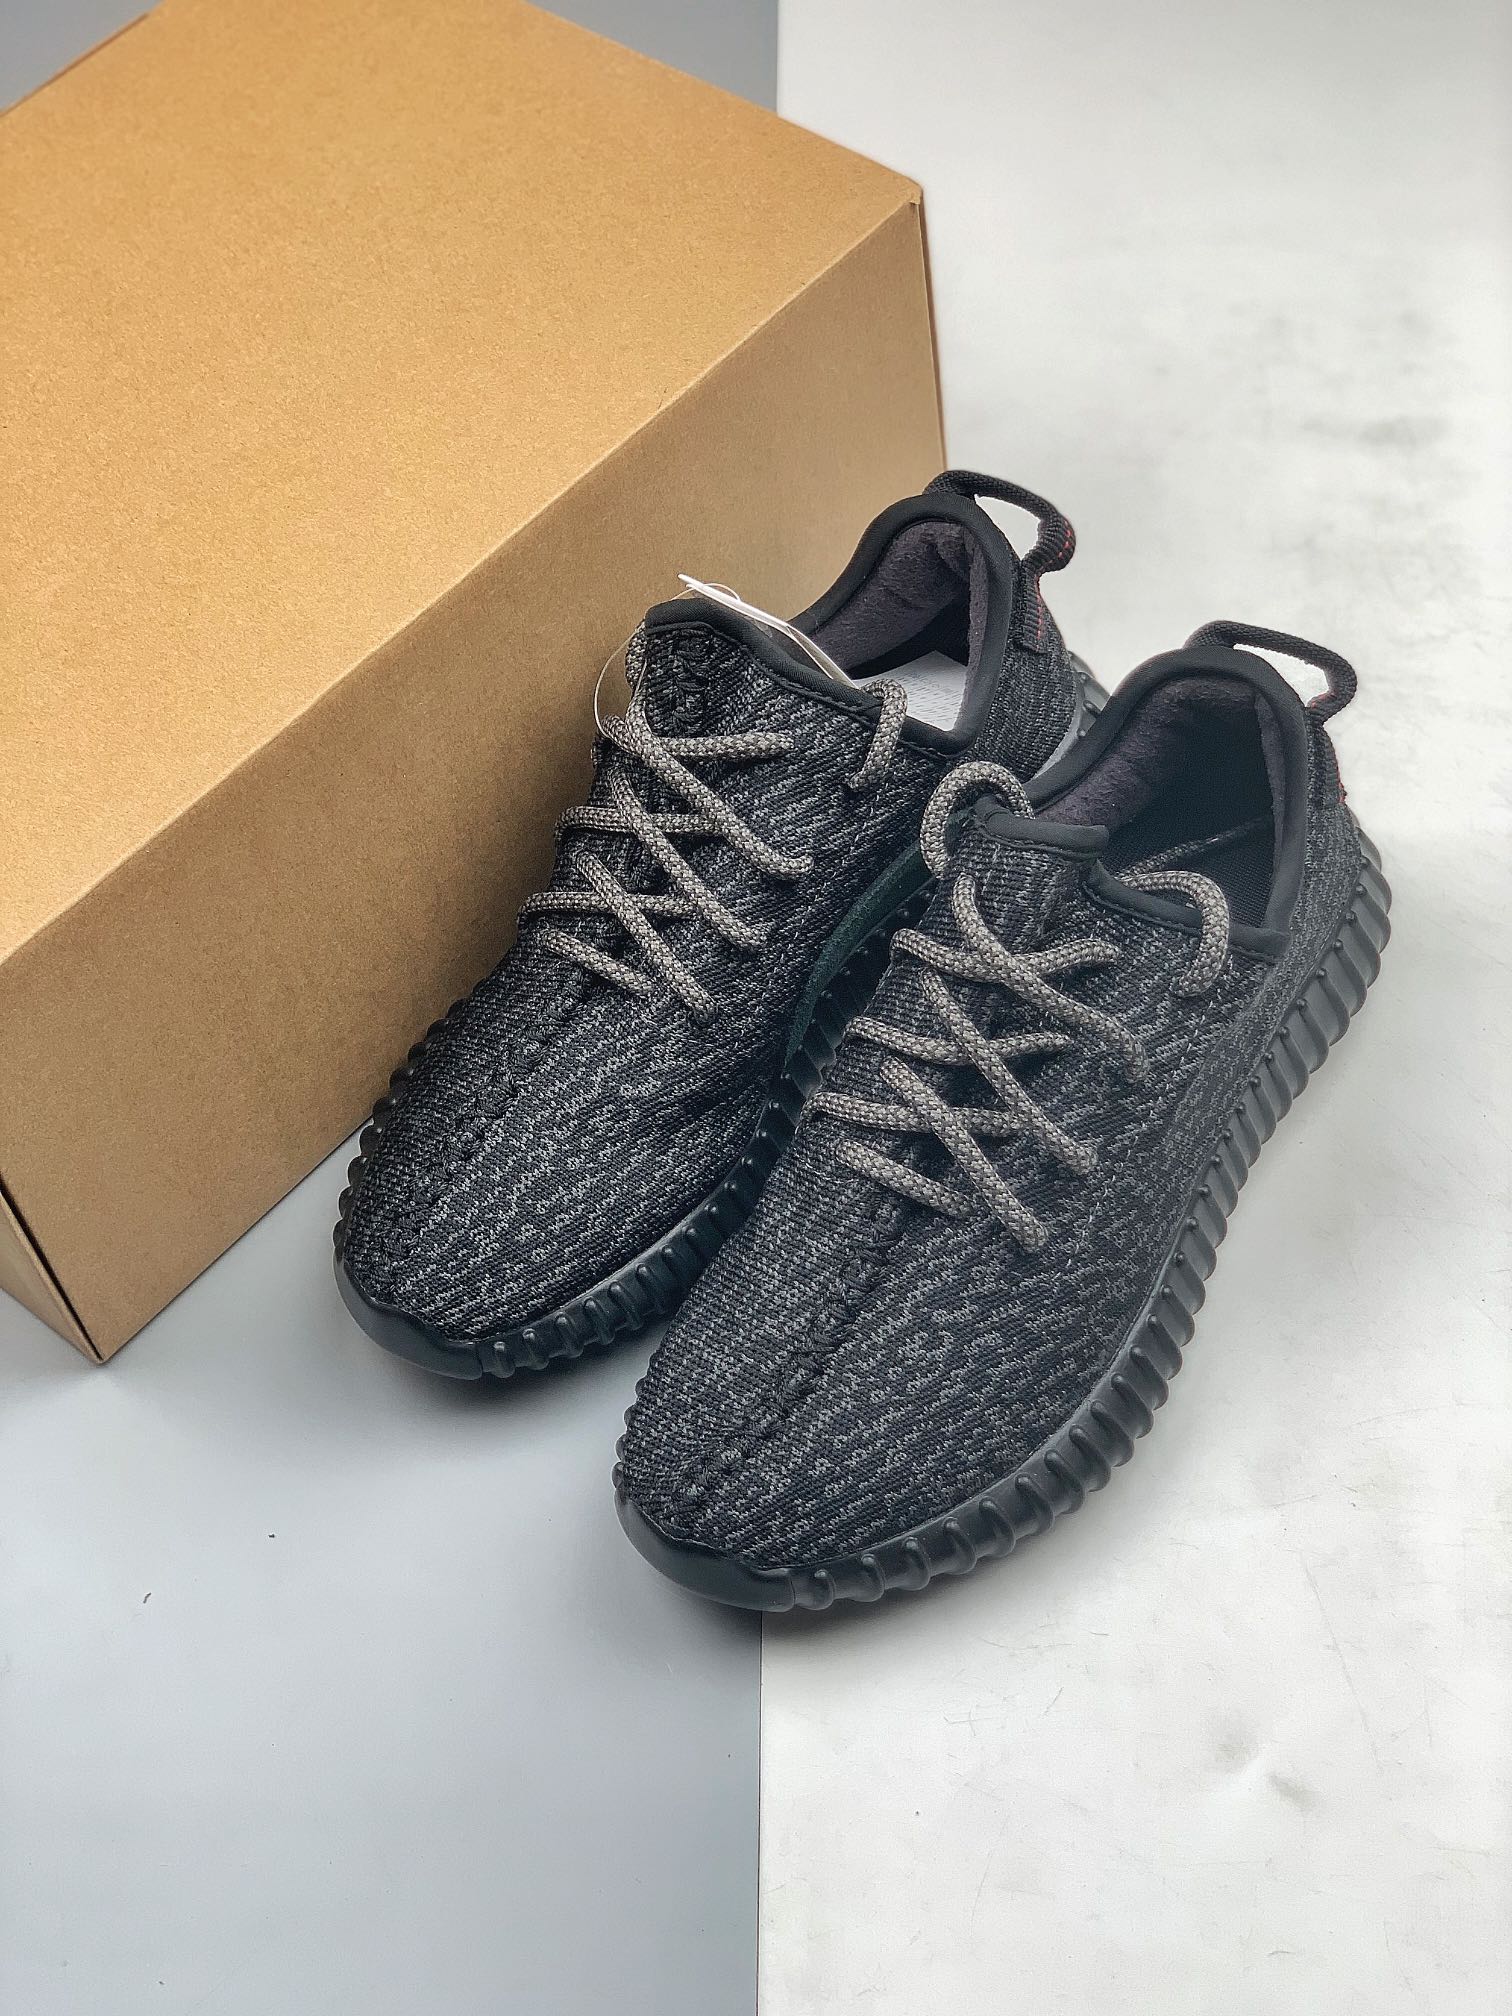 Adidas Yeezy Boost 350 Pirate Black BB5350 - Stylish and Comfortable Footwear